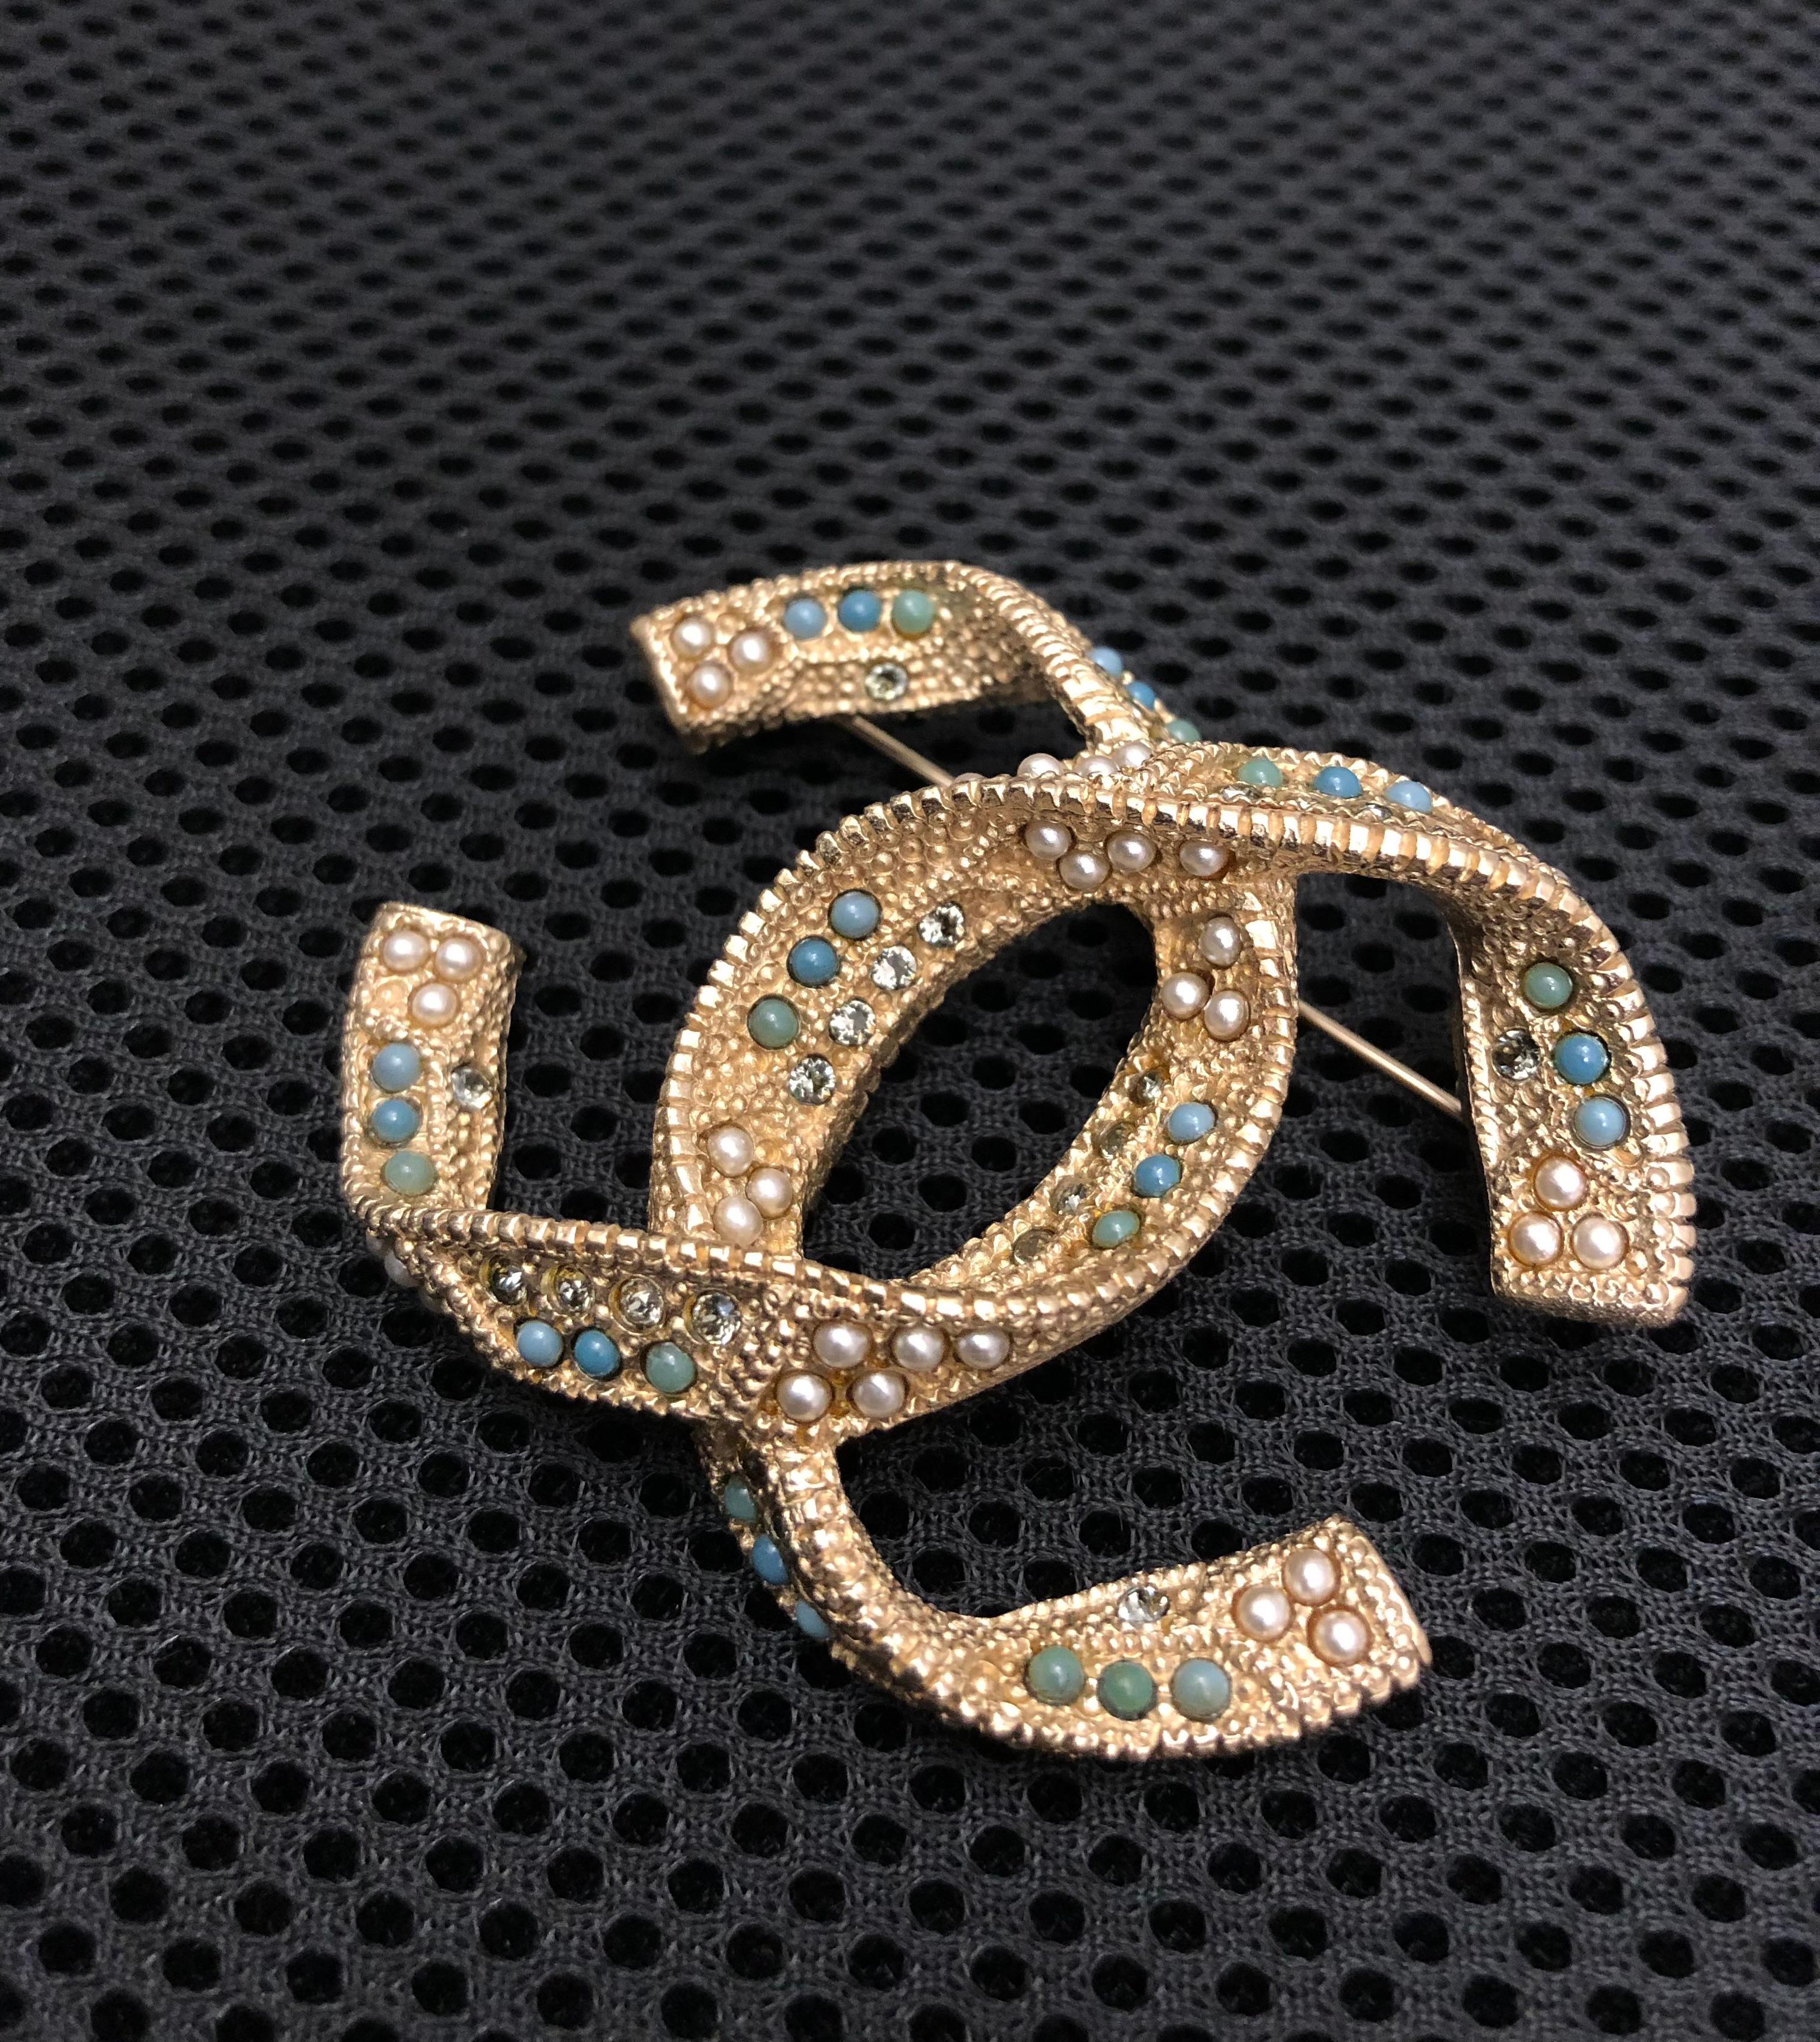 2015 CHANEL Gold Toned Faux Pearl Rhinestone CC Brooch For Sale 1